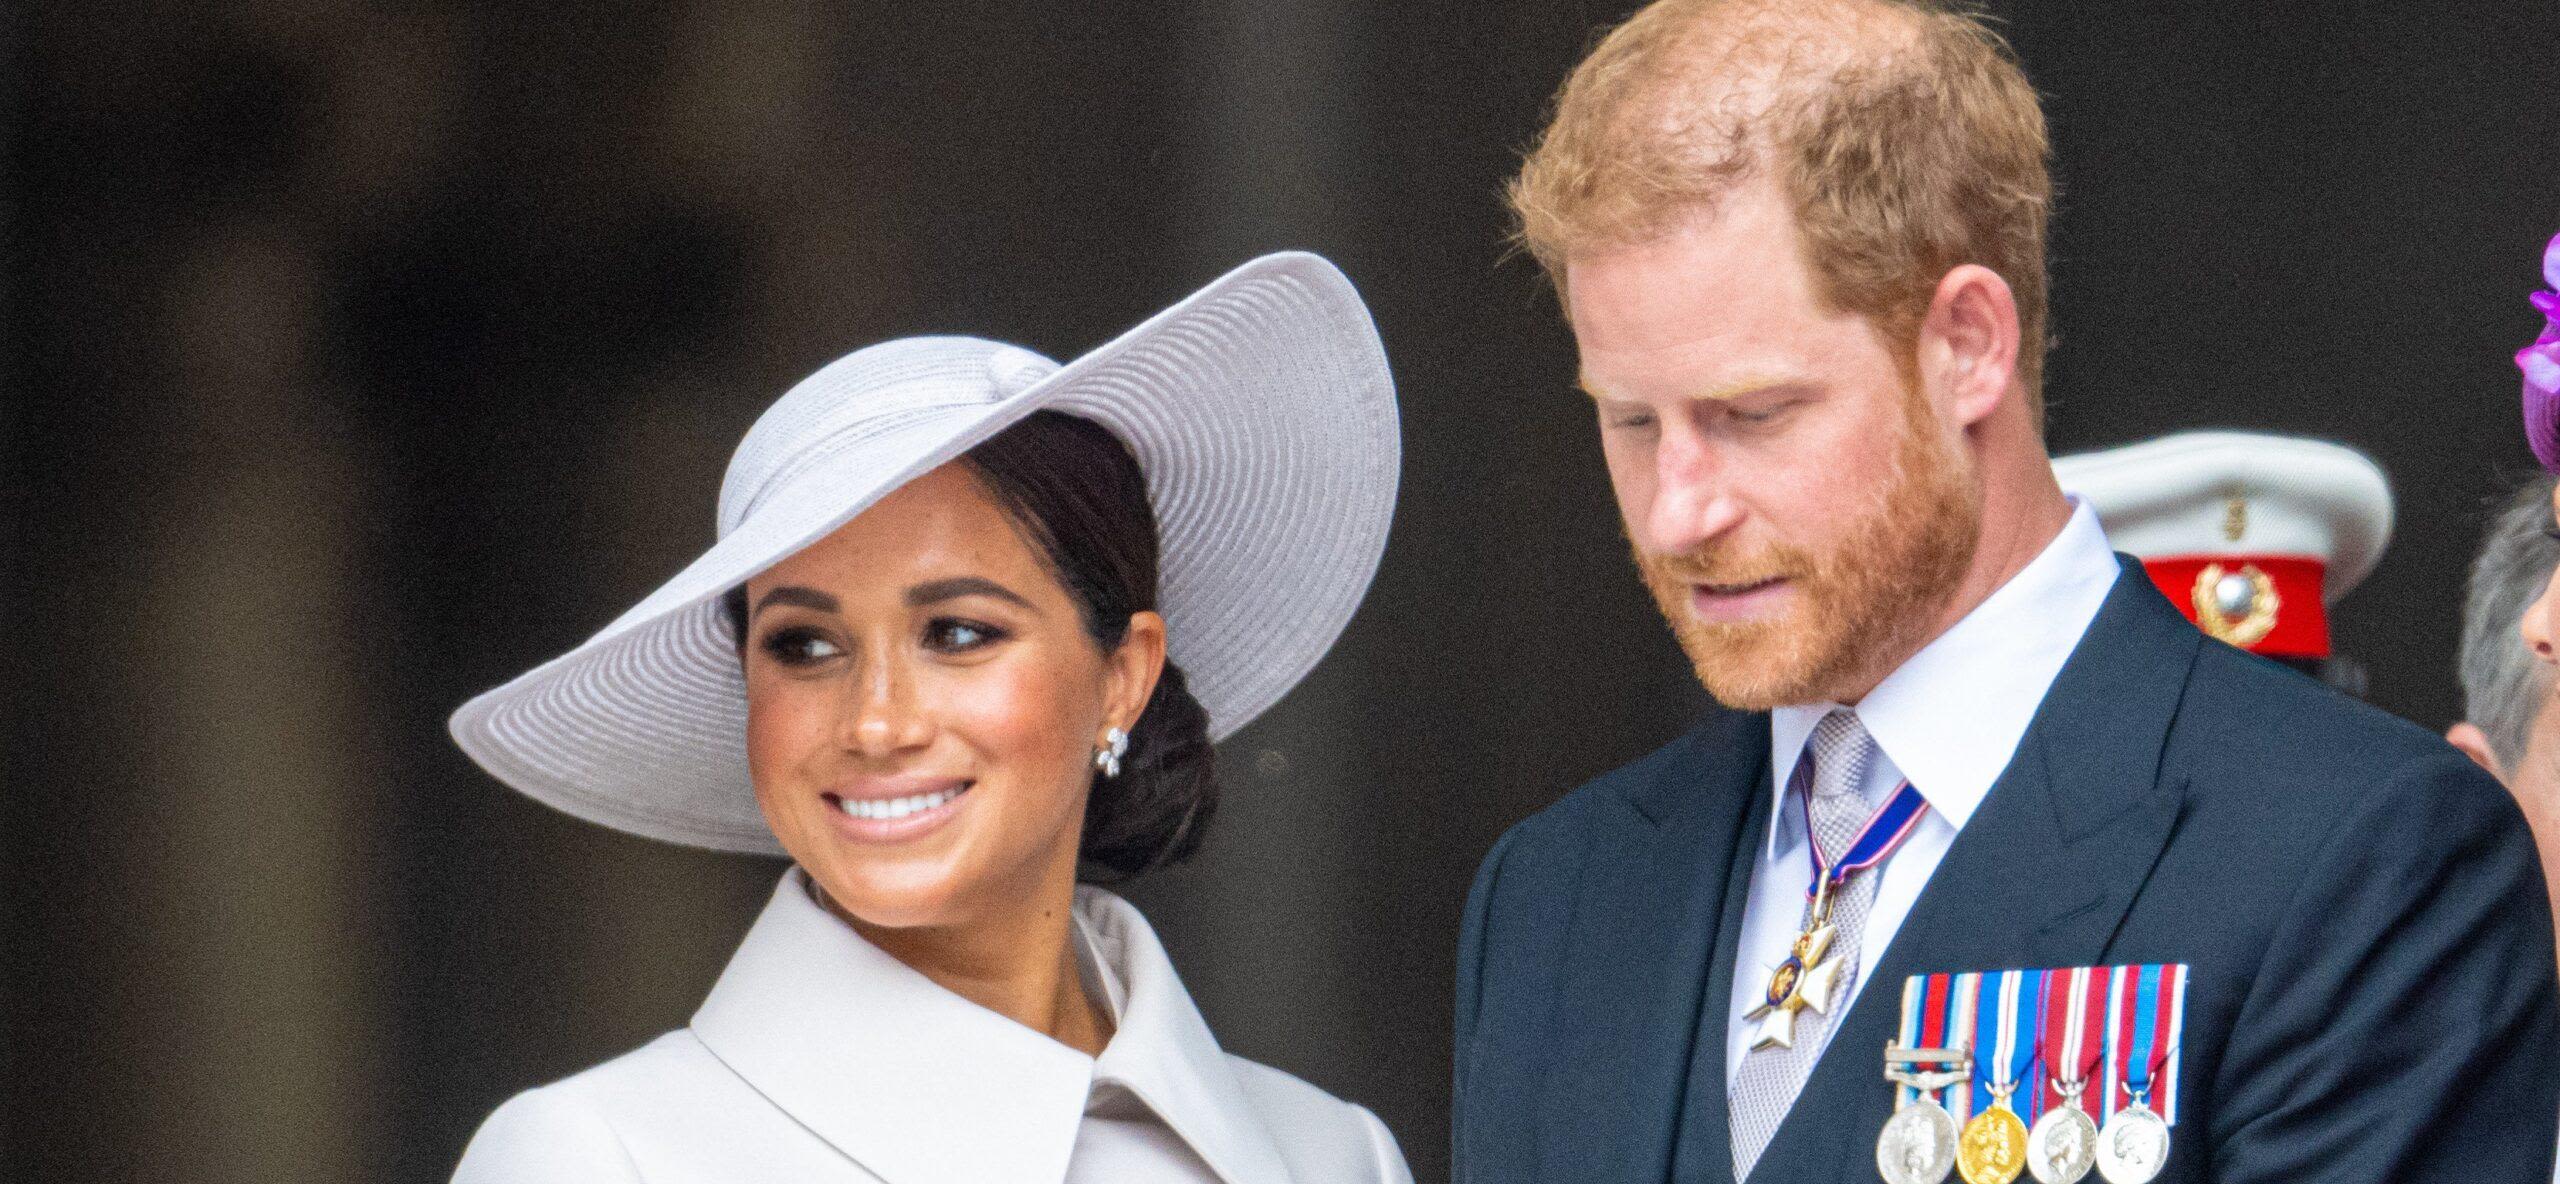 Prince Harry And Meghan Allegedly 'Struggle' To Manage $14M Mansion Over 'High-operating Costs'